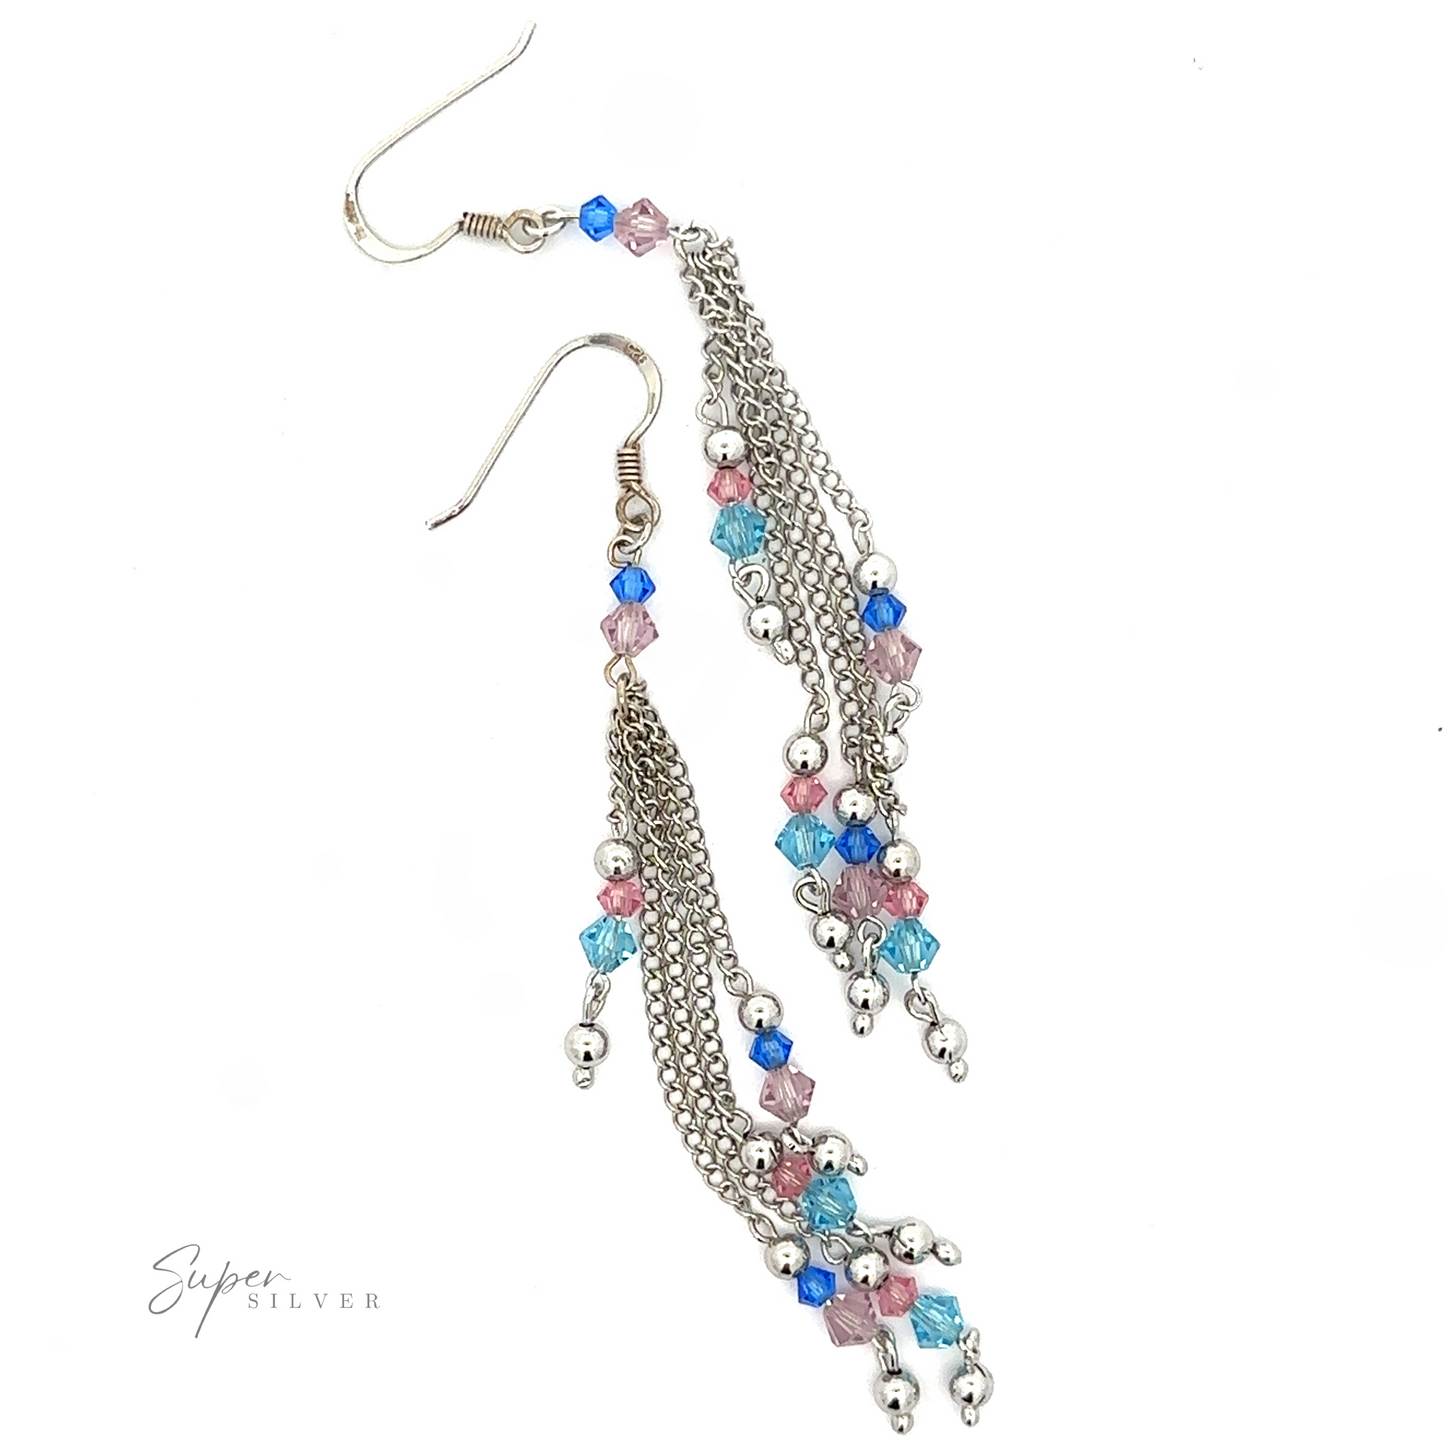 
                  
                    A pair of Layered Earrings with Multicolored Beads adorned with pink, blue, and silver multicolored beads on sterling silver chains. The earrings have hooks for piercing.
                  
                